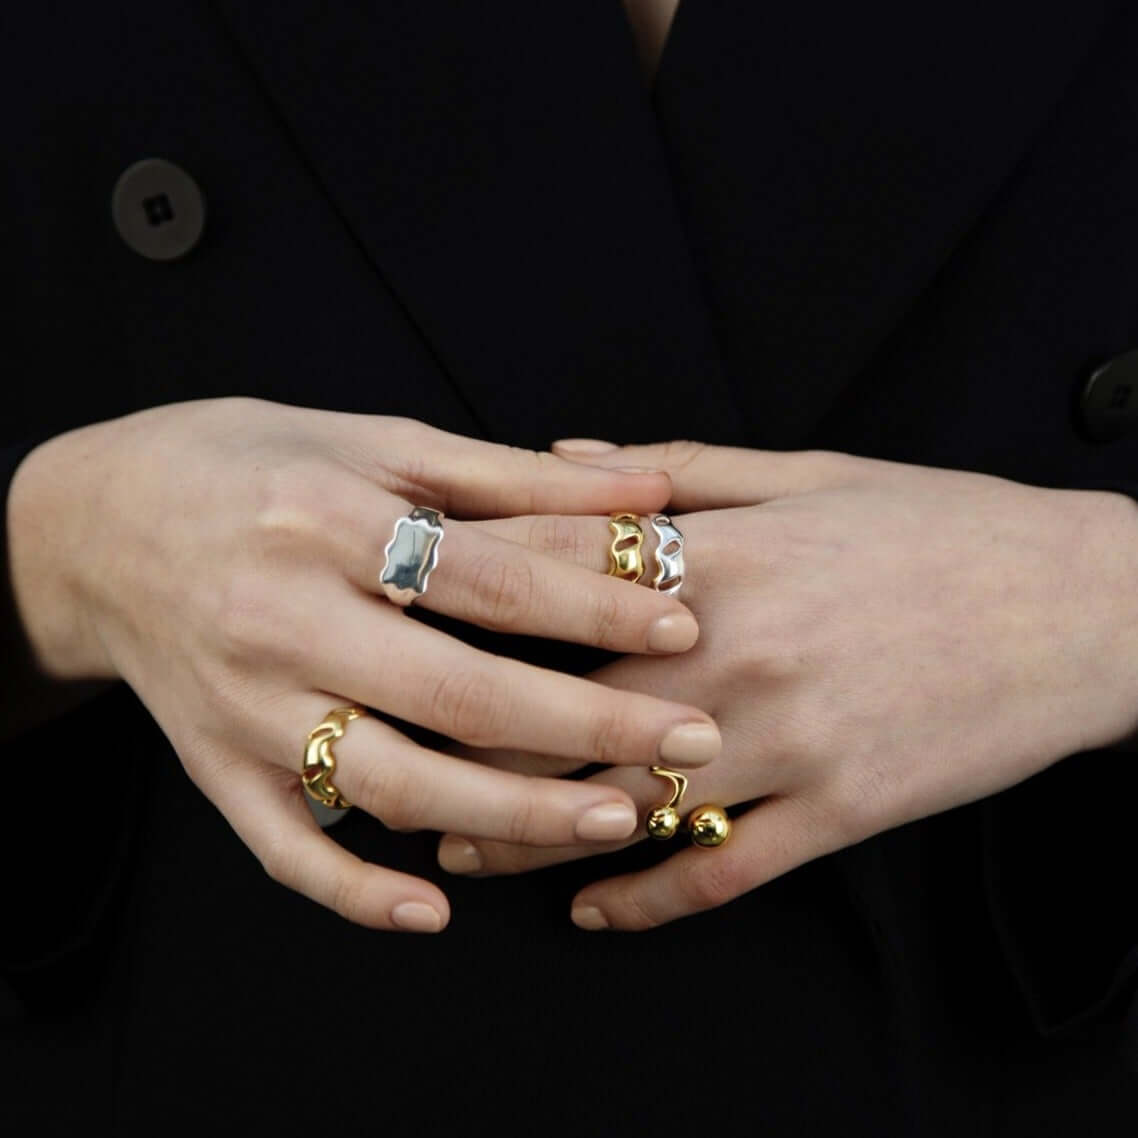 Female hands held together, wearings many rings